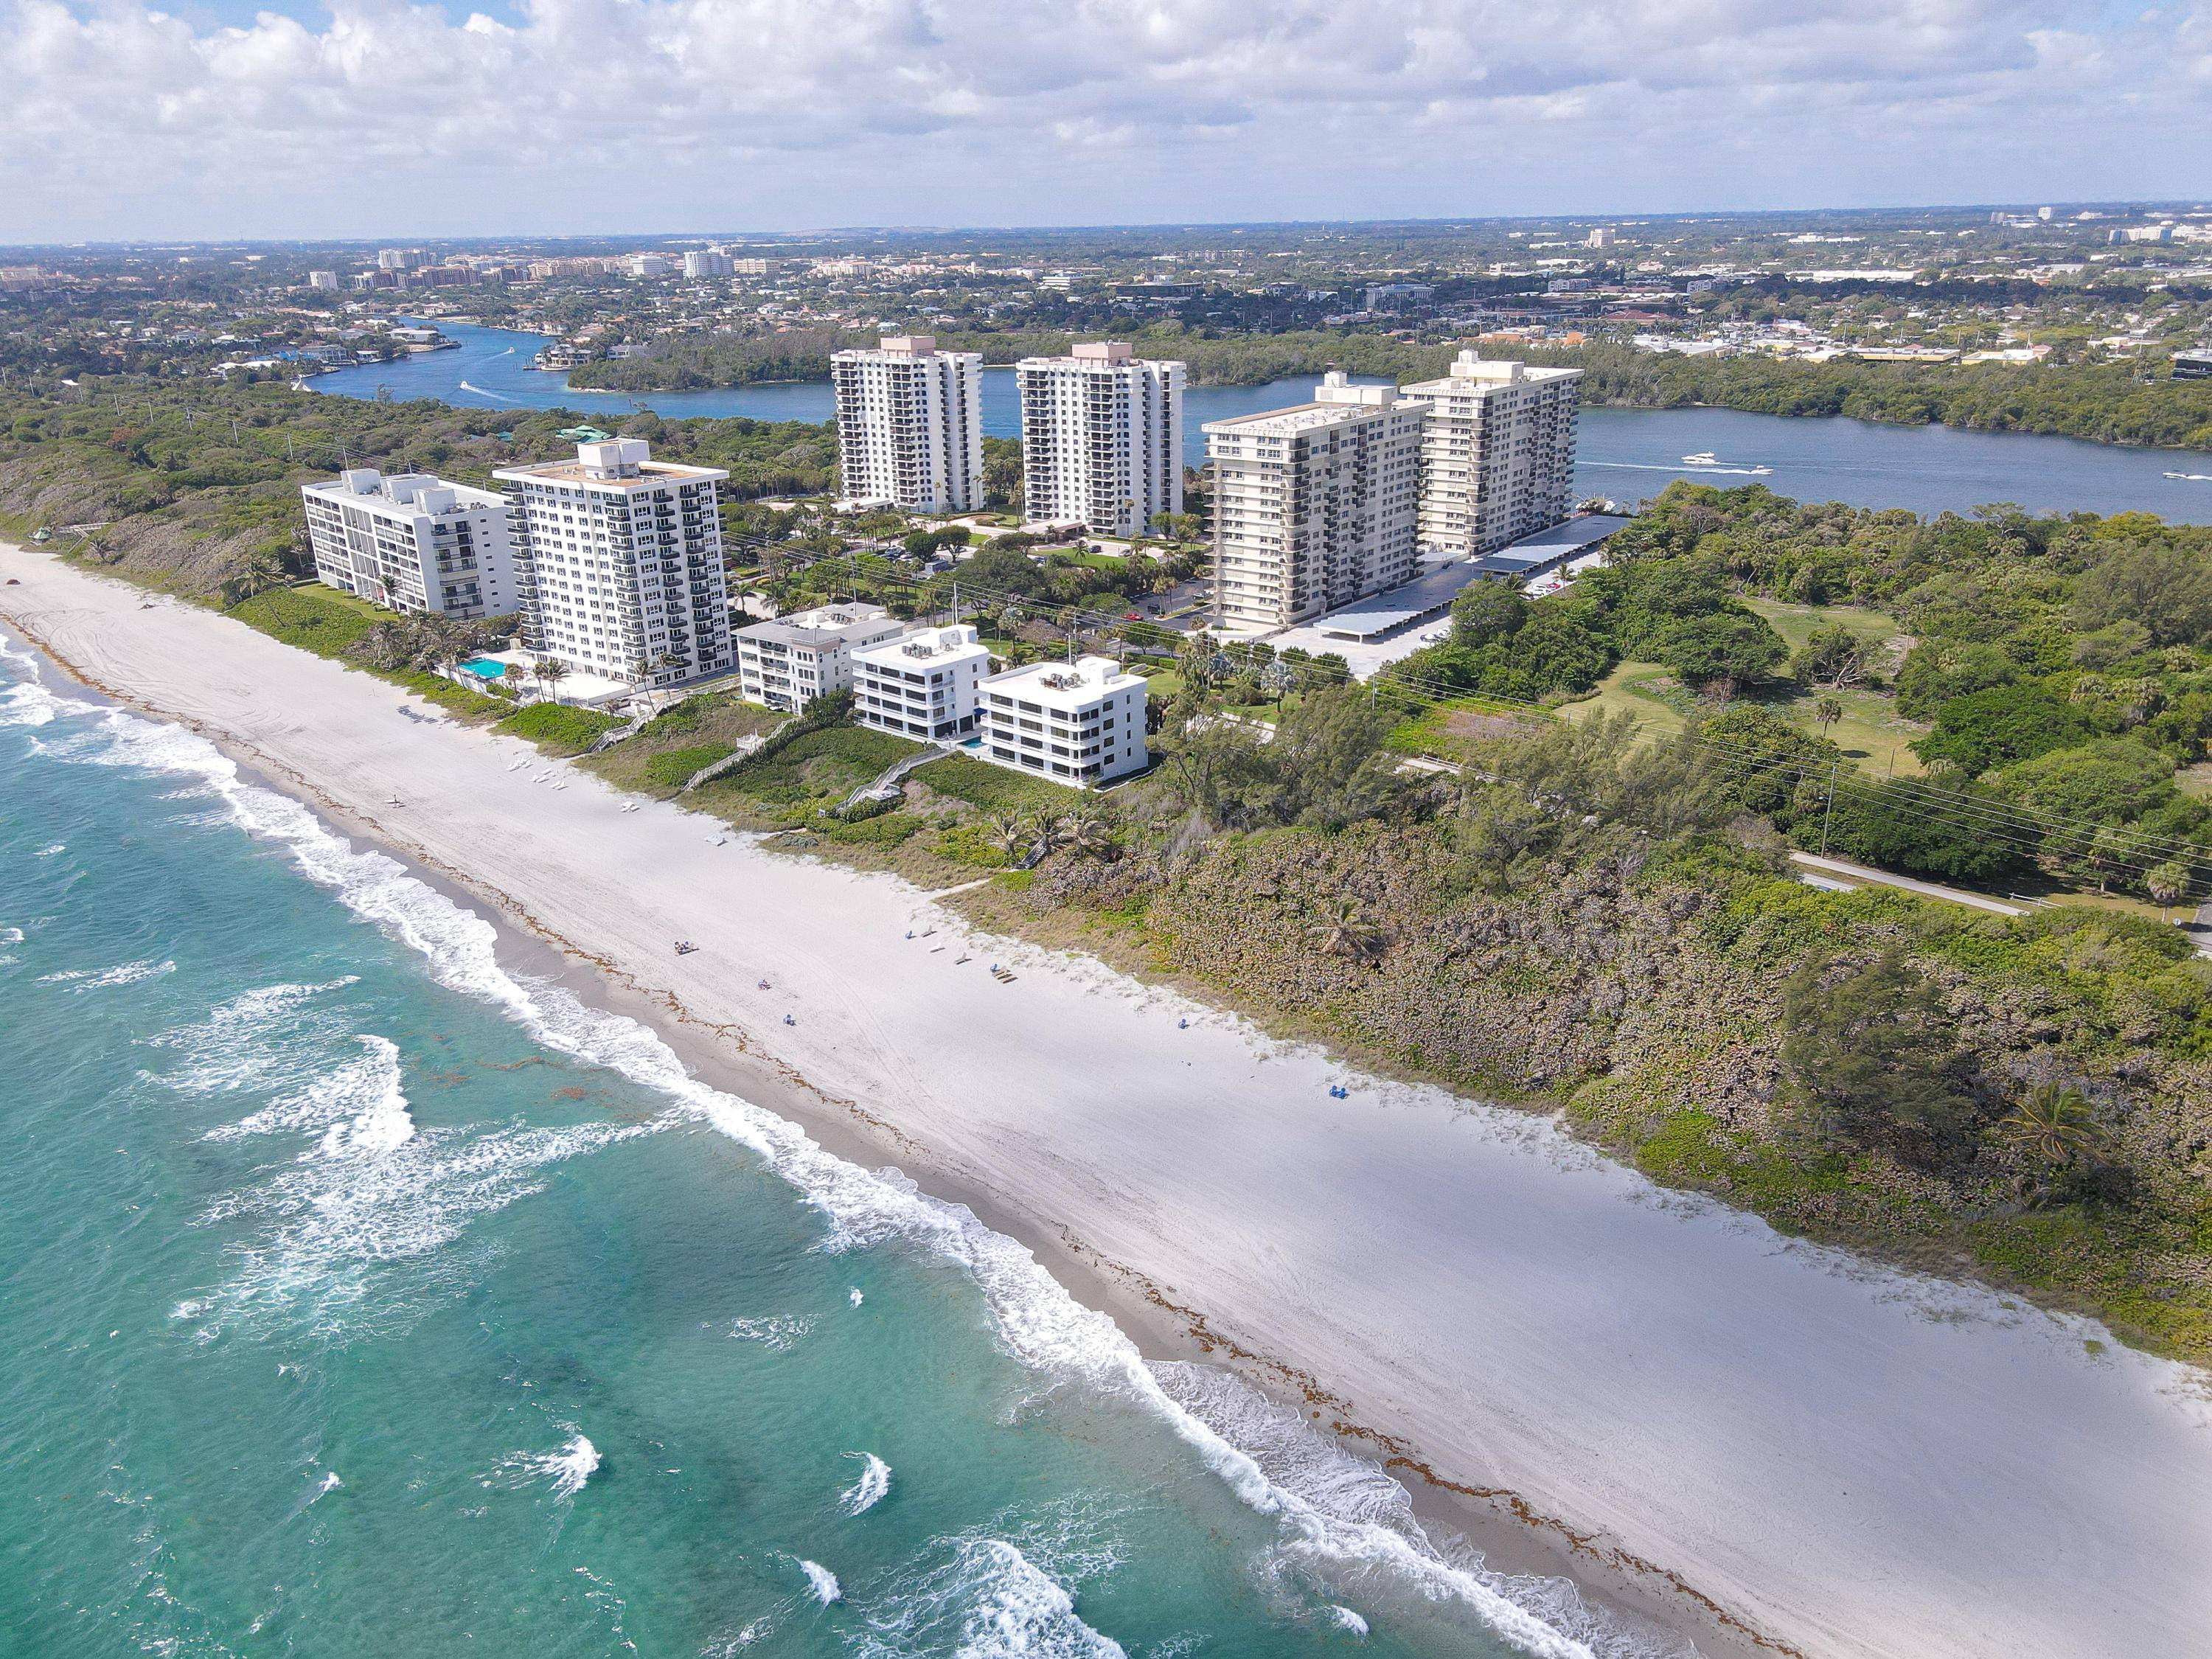 EXPERIENCE THE LIFESTYLE Stretching from the Atlantic Ocean to the Intracoastal, this idyllic getaway in Boca Towers defines the Florida Lifestyle.